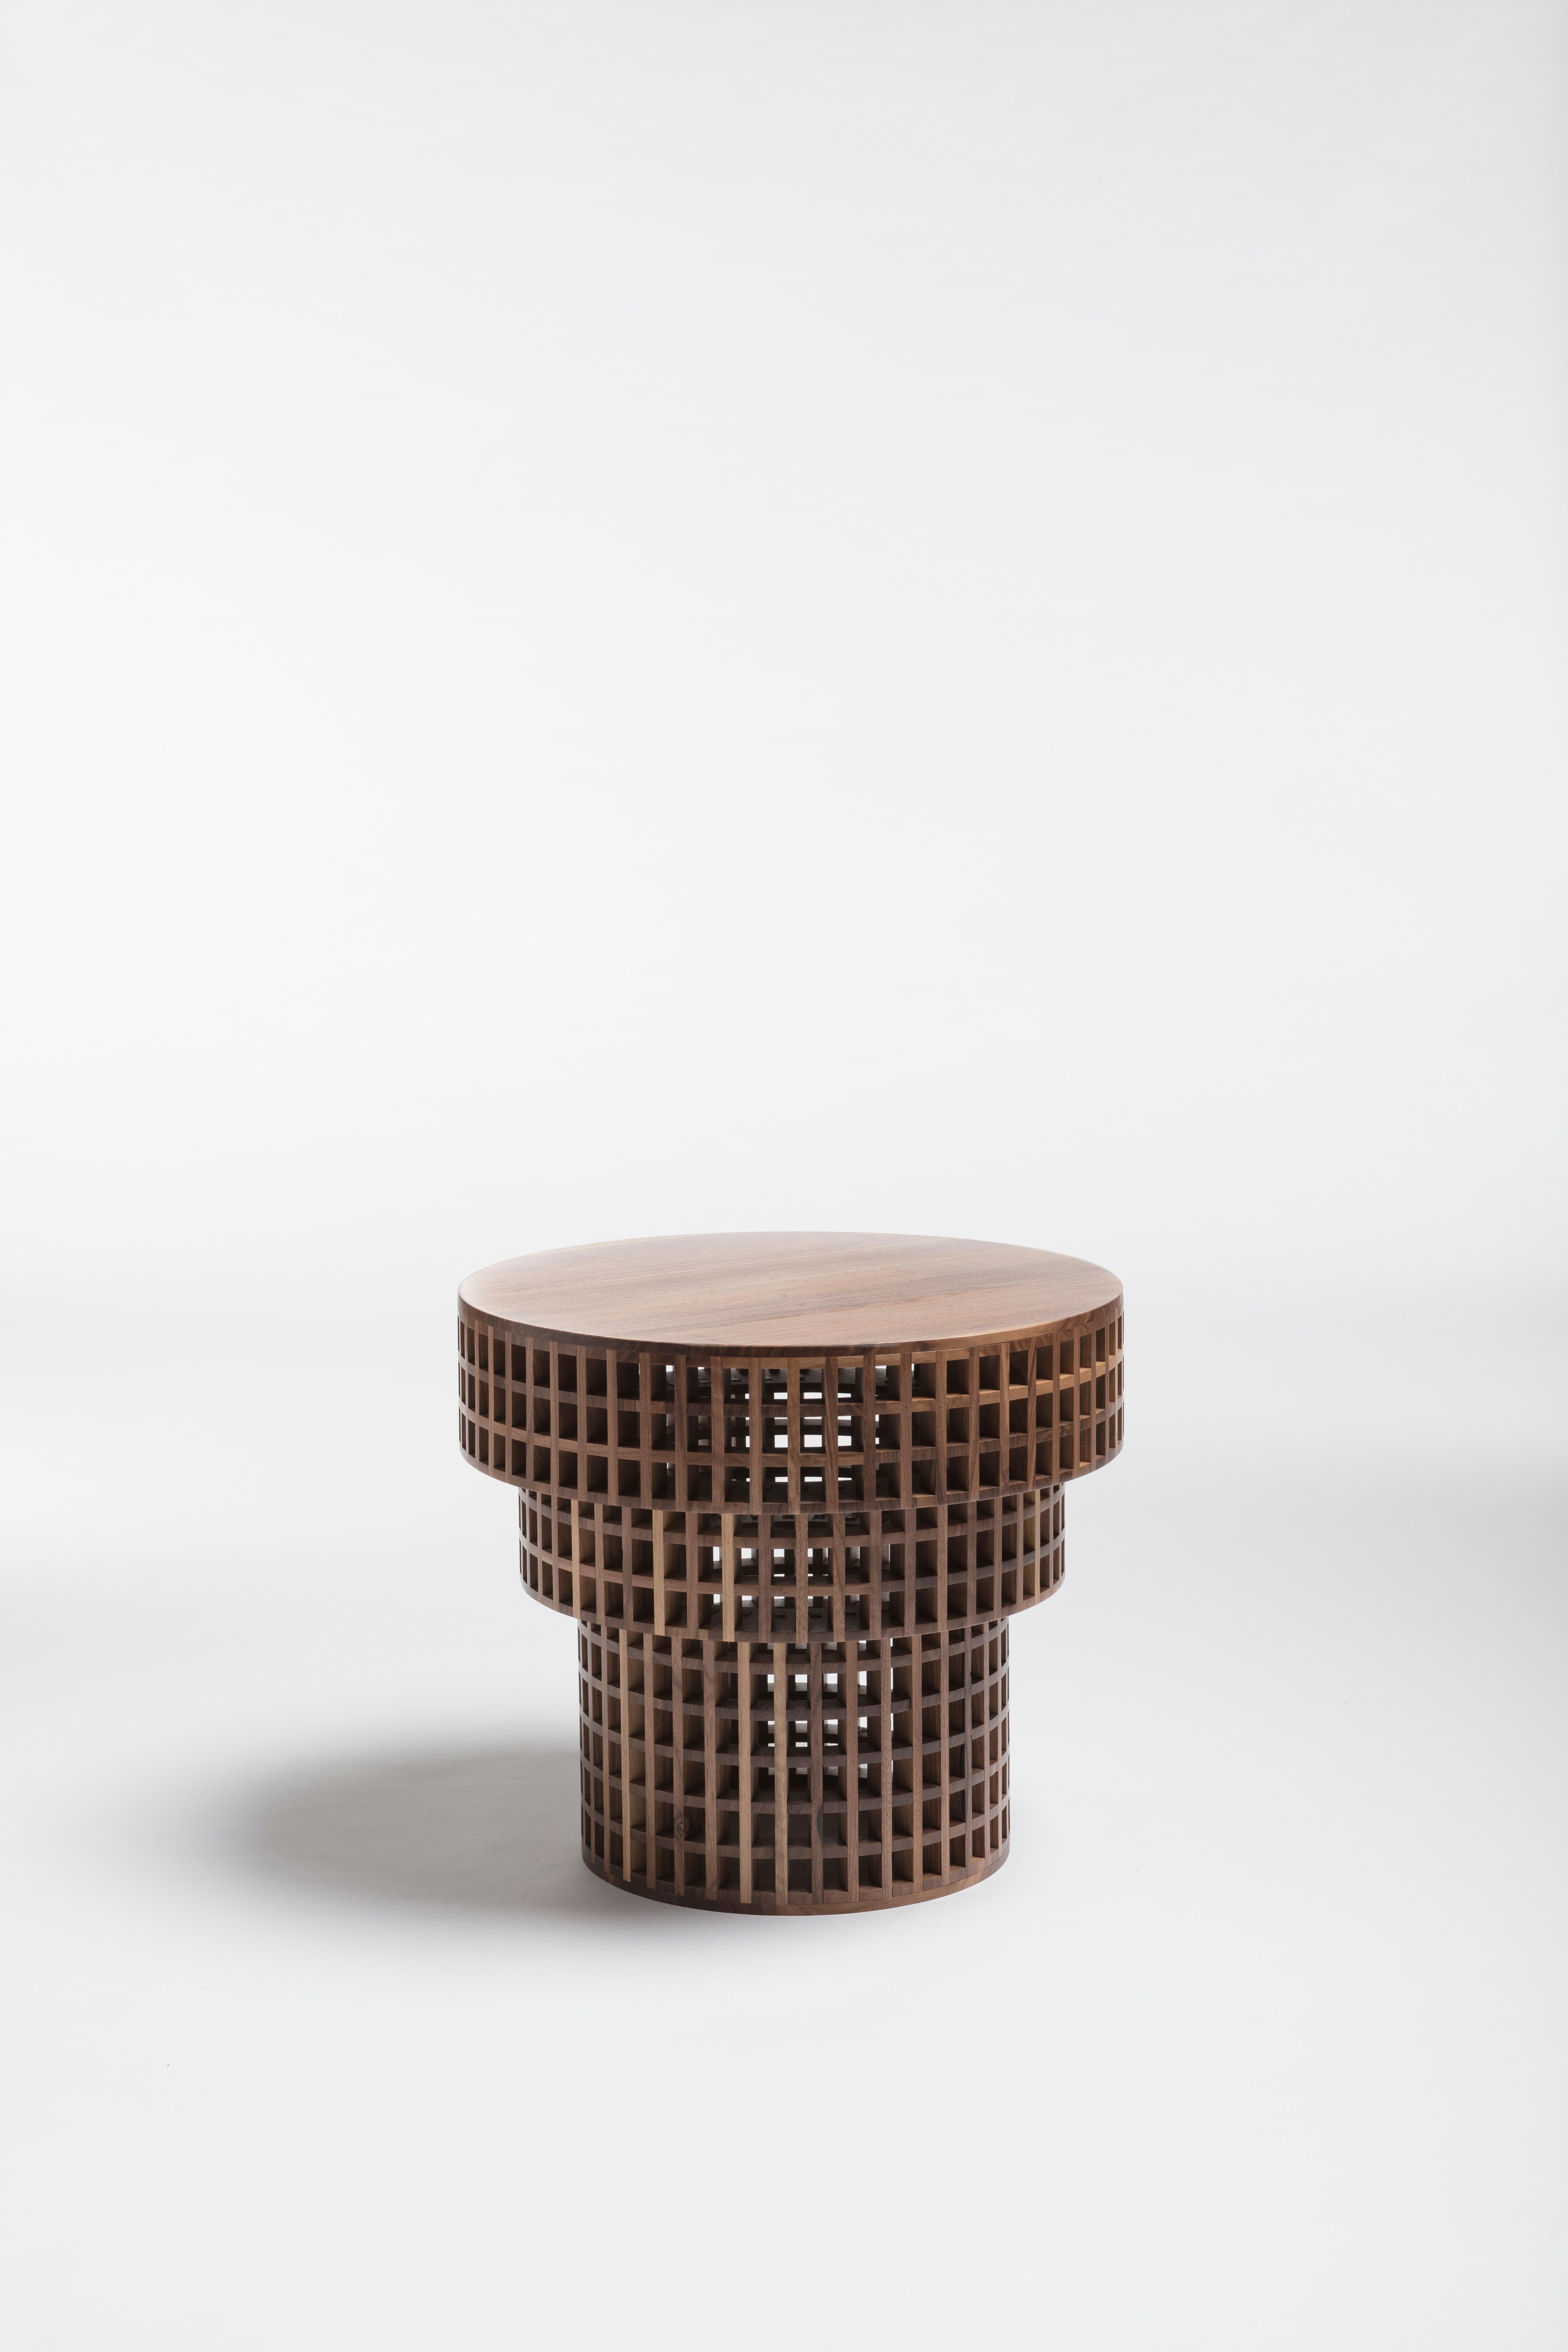 Carabottino tavolino side table by Cara Davide
Carabottino collection
Medulum
Dimensions: Ø 58 x H 51 cm
Materials: Canaletto walnut 

Also available: linden wood, European walnut

A wooden grating in a two-dimensional form traditionally